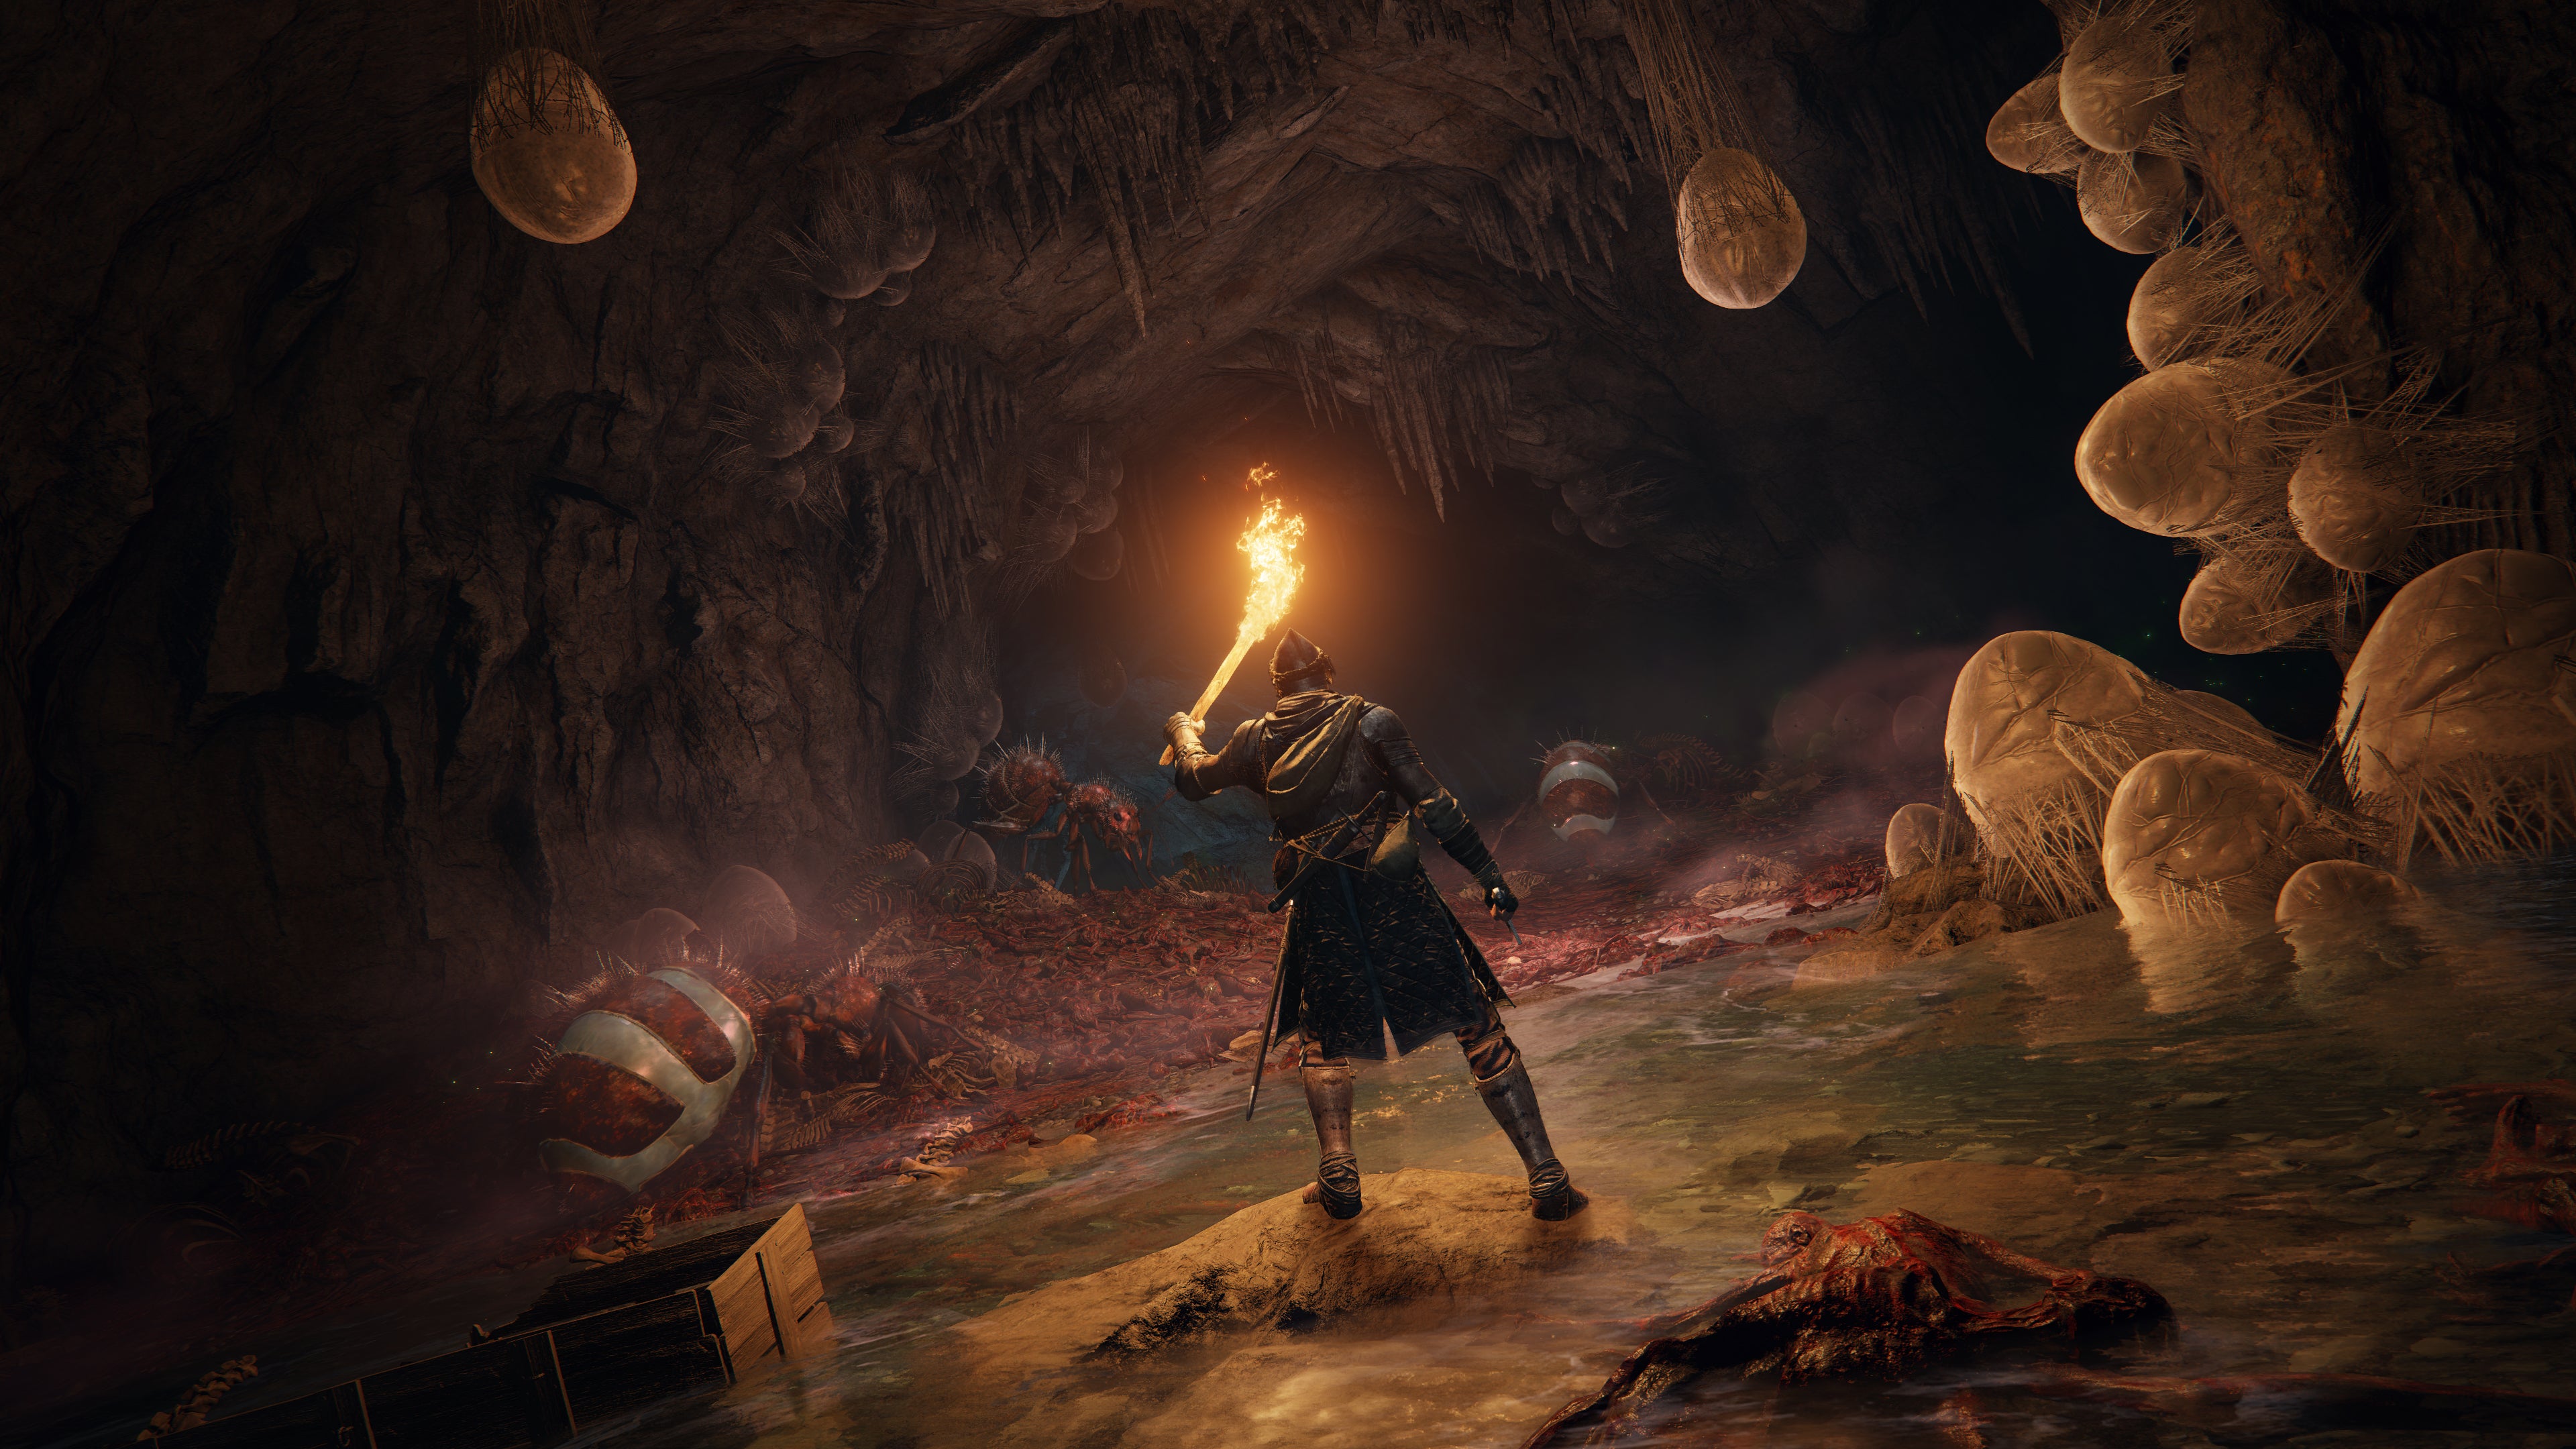 Image for Elden Ring Explained - What we can glean from the first gameplay trailer